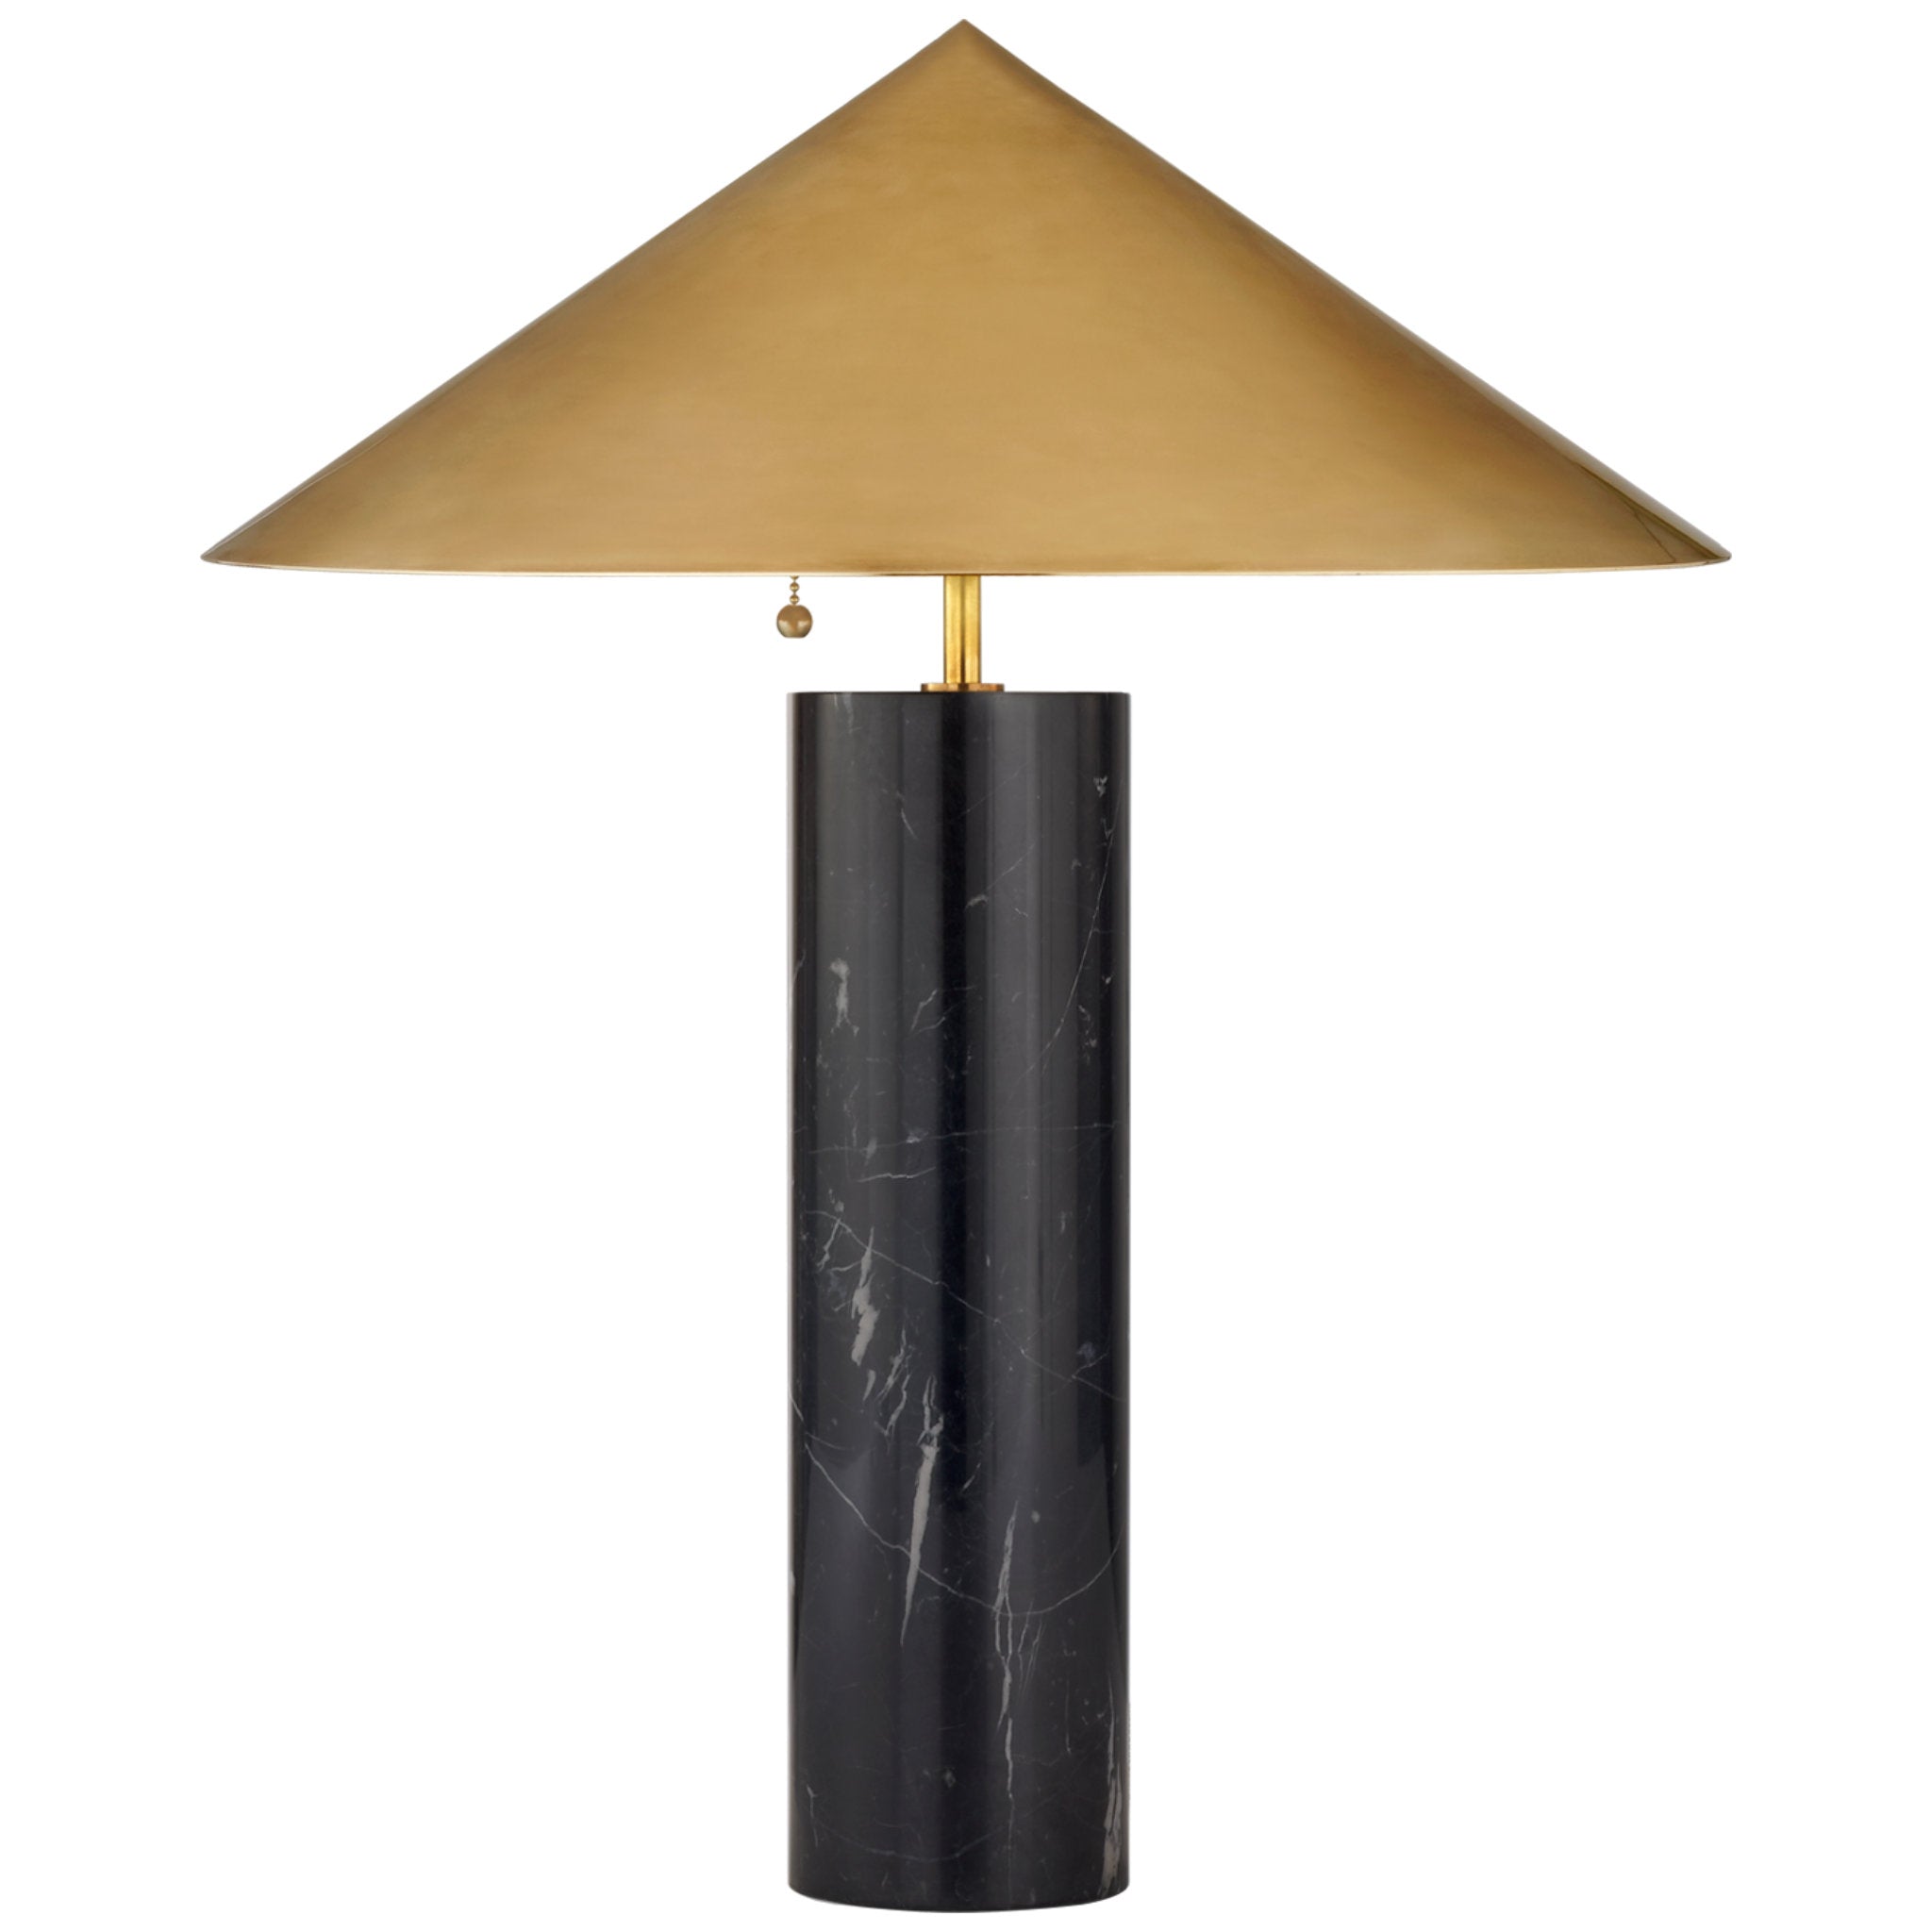 Halcyon Accent Table Lamp in Quartz with Antique Brass Shade